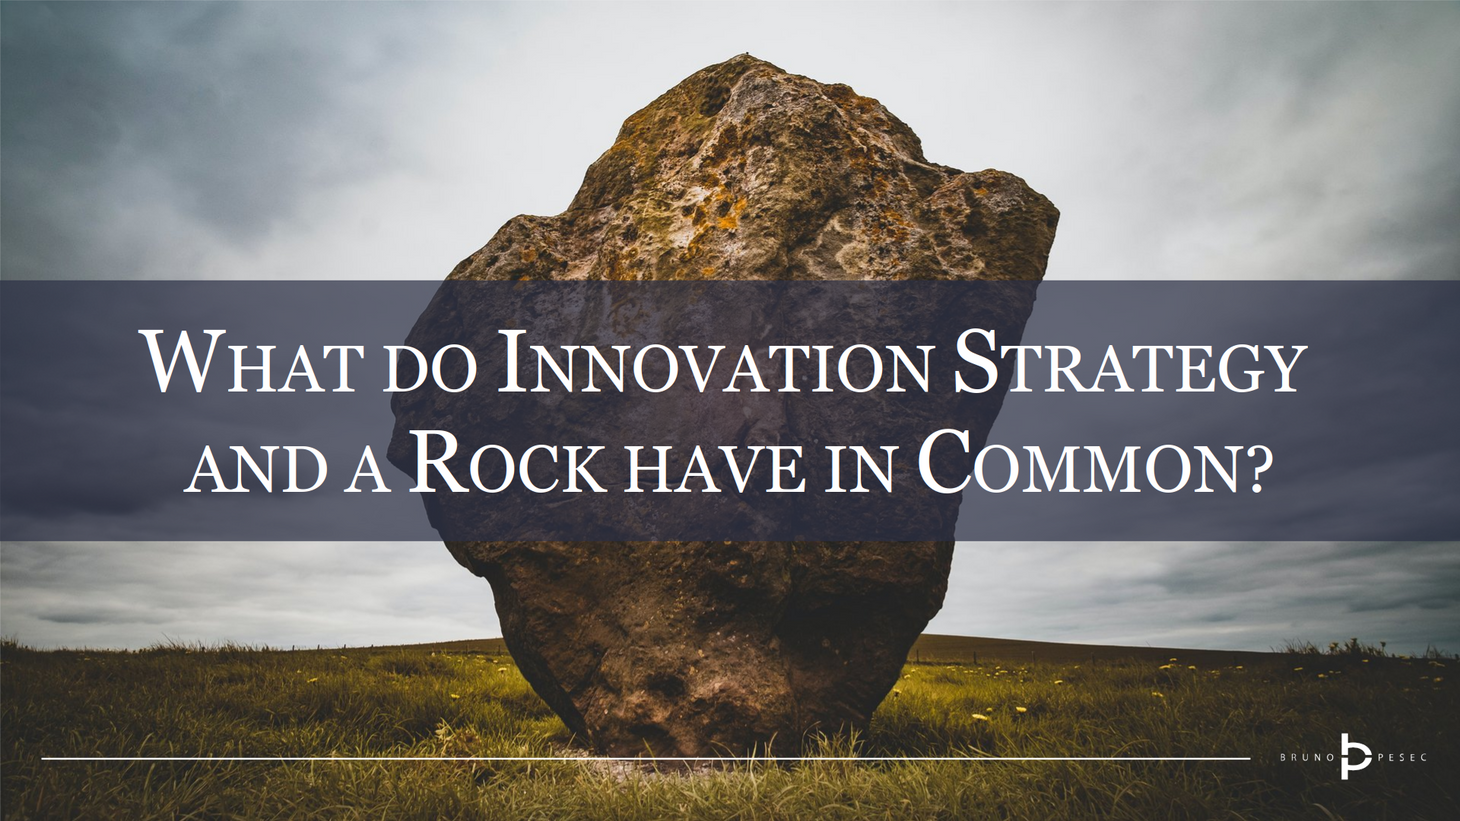 What do innovation strategy and a rock have in common?